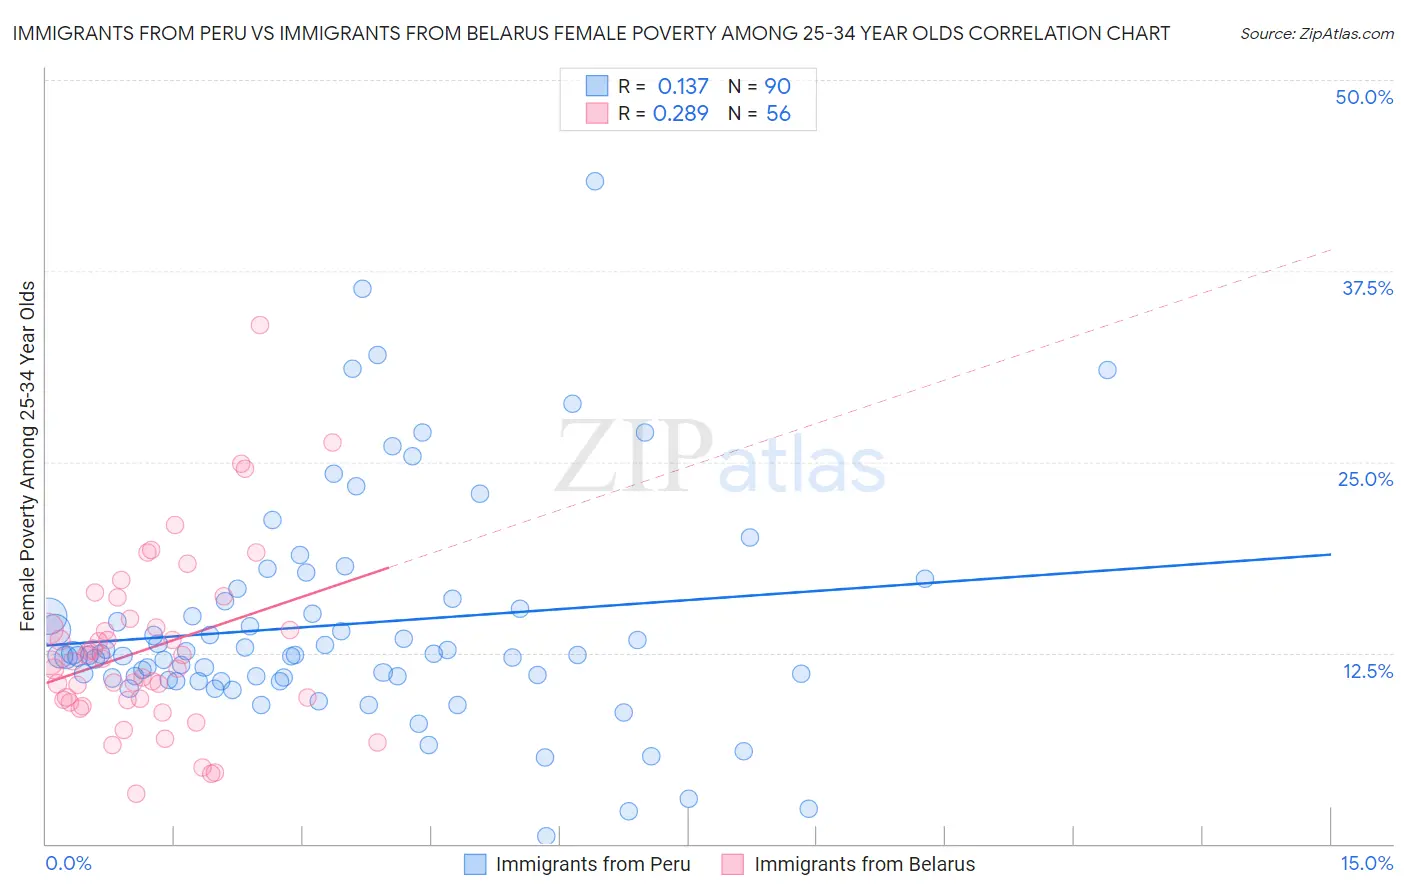 Immigrants from Peru vs Immigrants from Belarus Female Poverty Among 25-34 Year Olds